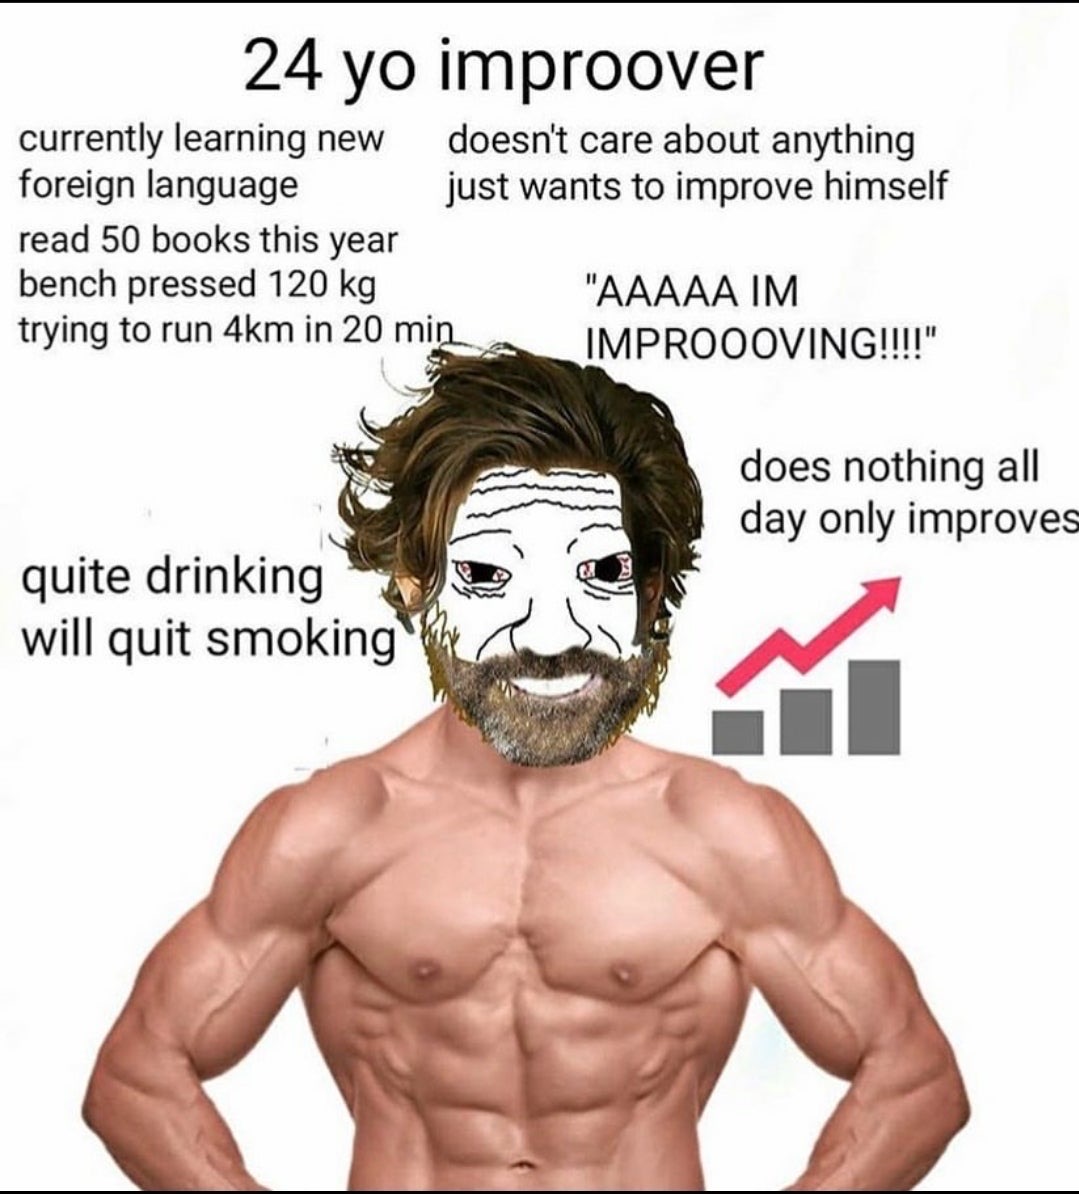 improover wojak - 24 yo improover currently learning new doesn't care about anything foreign language just wants to improve himself read 50 books this year bench pressed 120 kg "Aaaaa Im trying to run 4km in 20 min Improooving!!!!" does nothing all day on